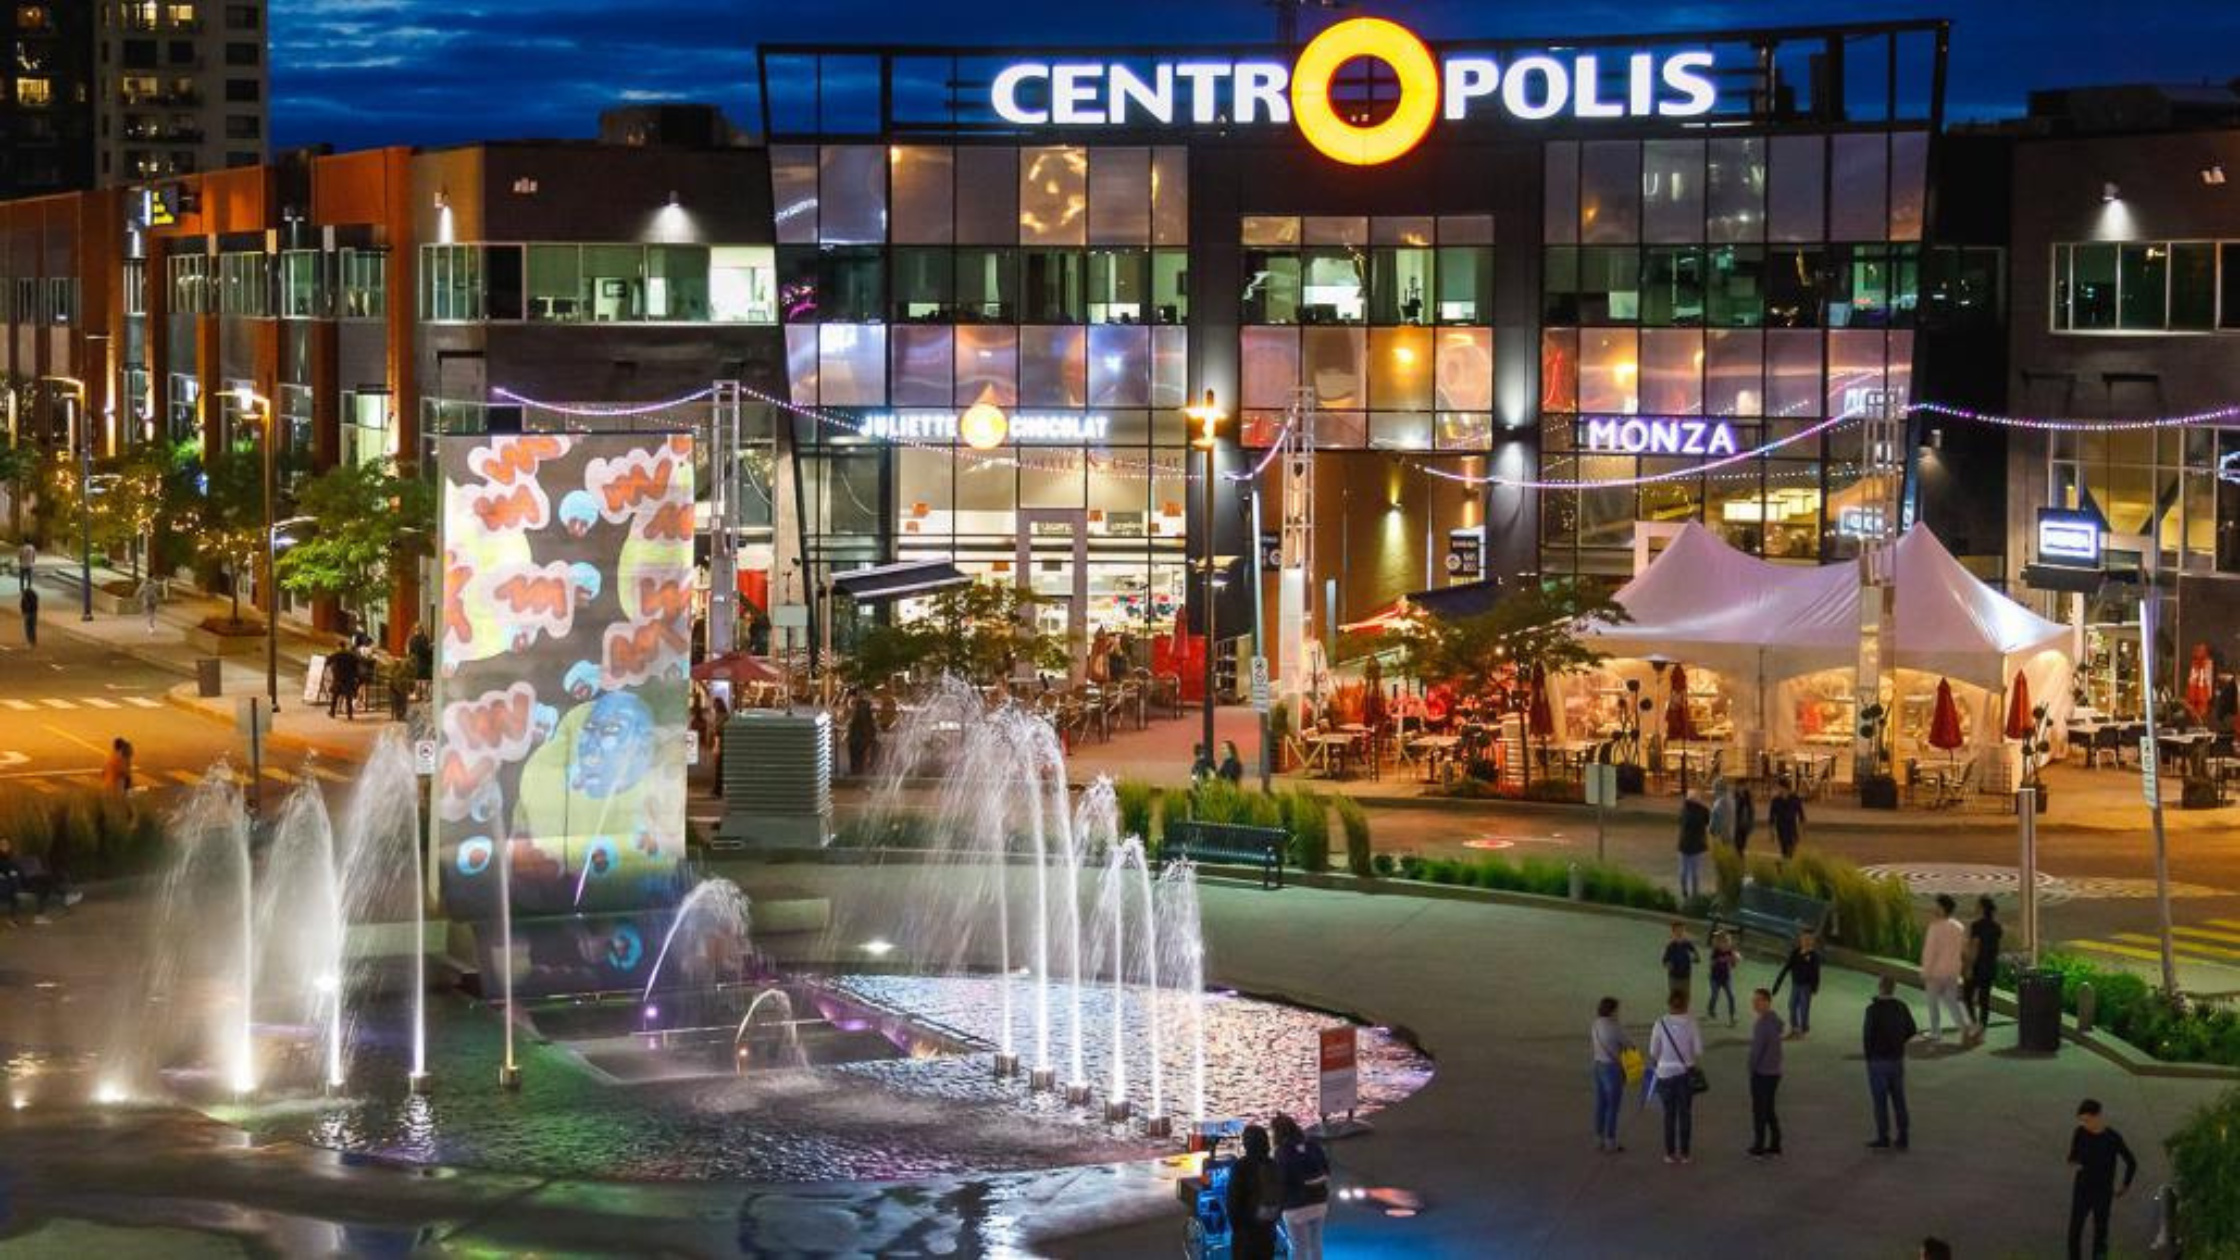 Rare: Franchised Restaurant at Centropolis in Laval for Sale